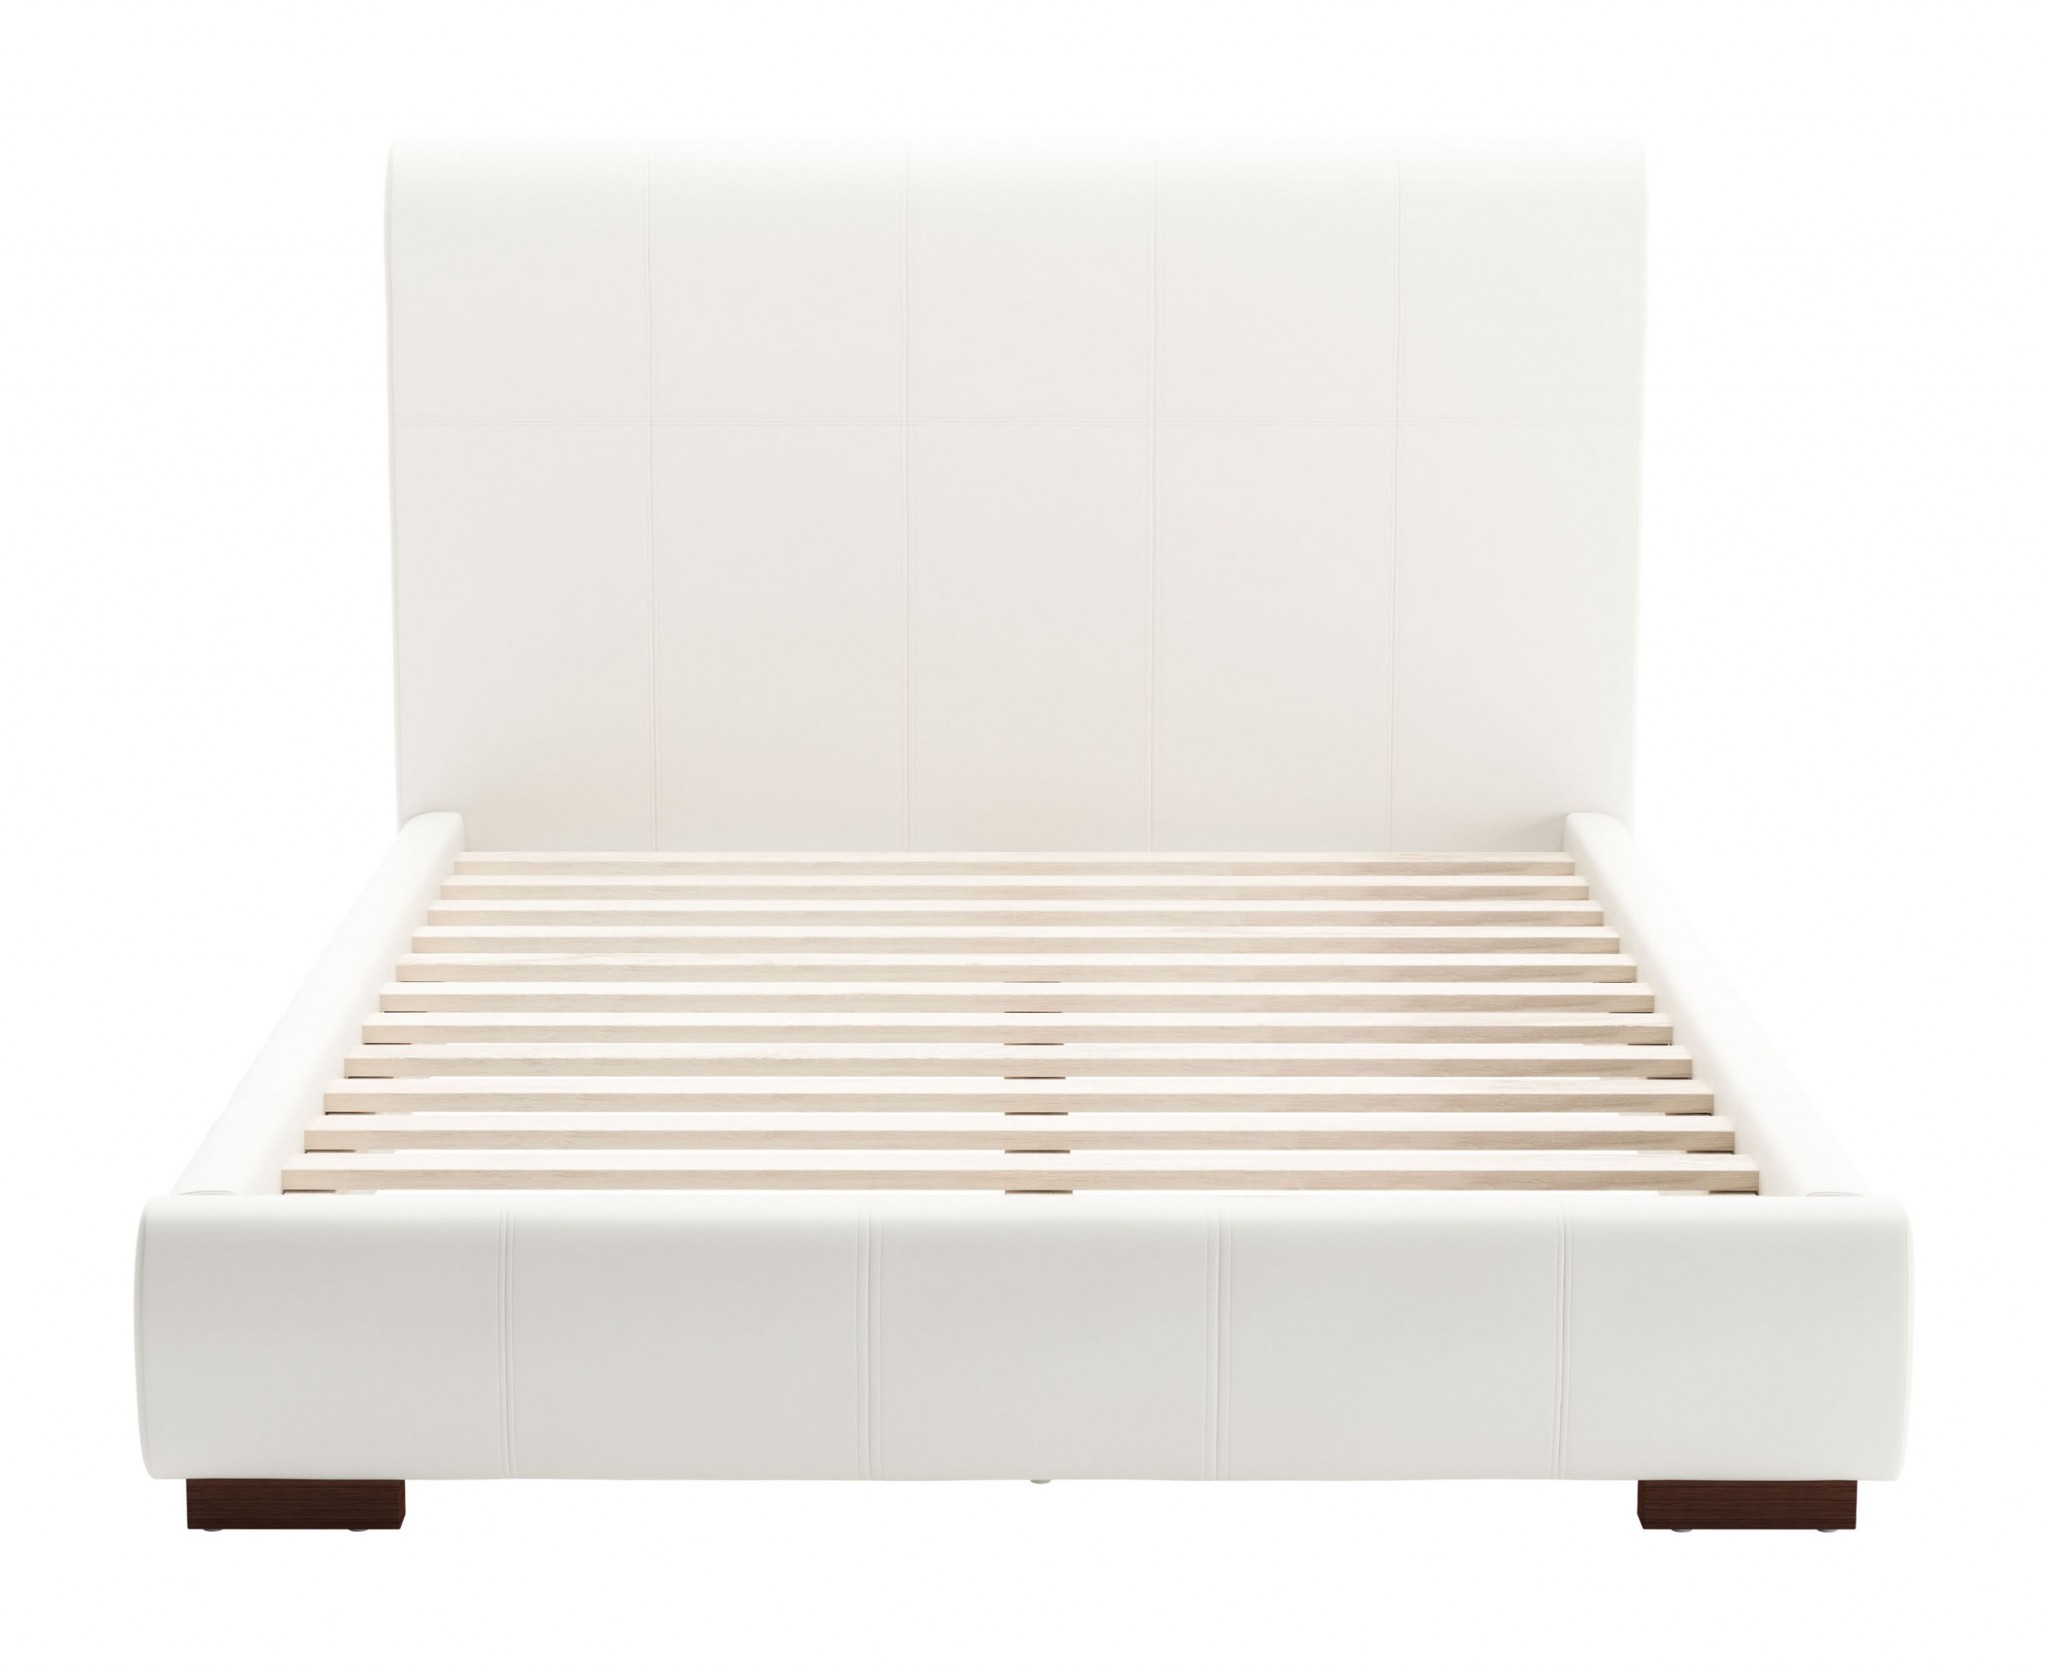 62.2" x 83.9" x 43.5" White, Leatherette, Plywood, MDF, Full Bed